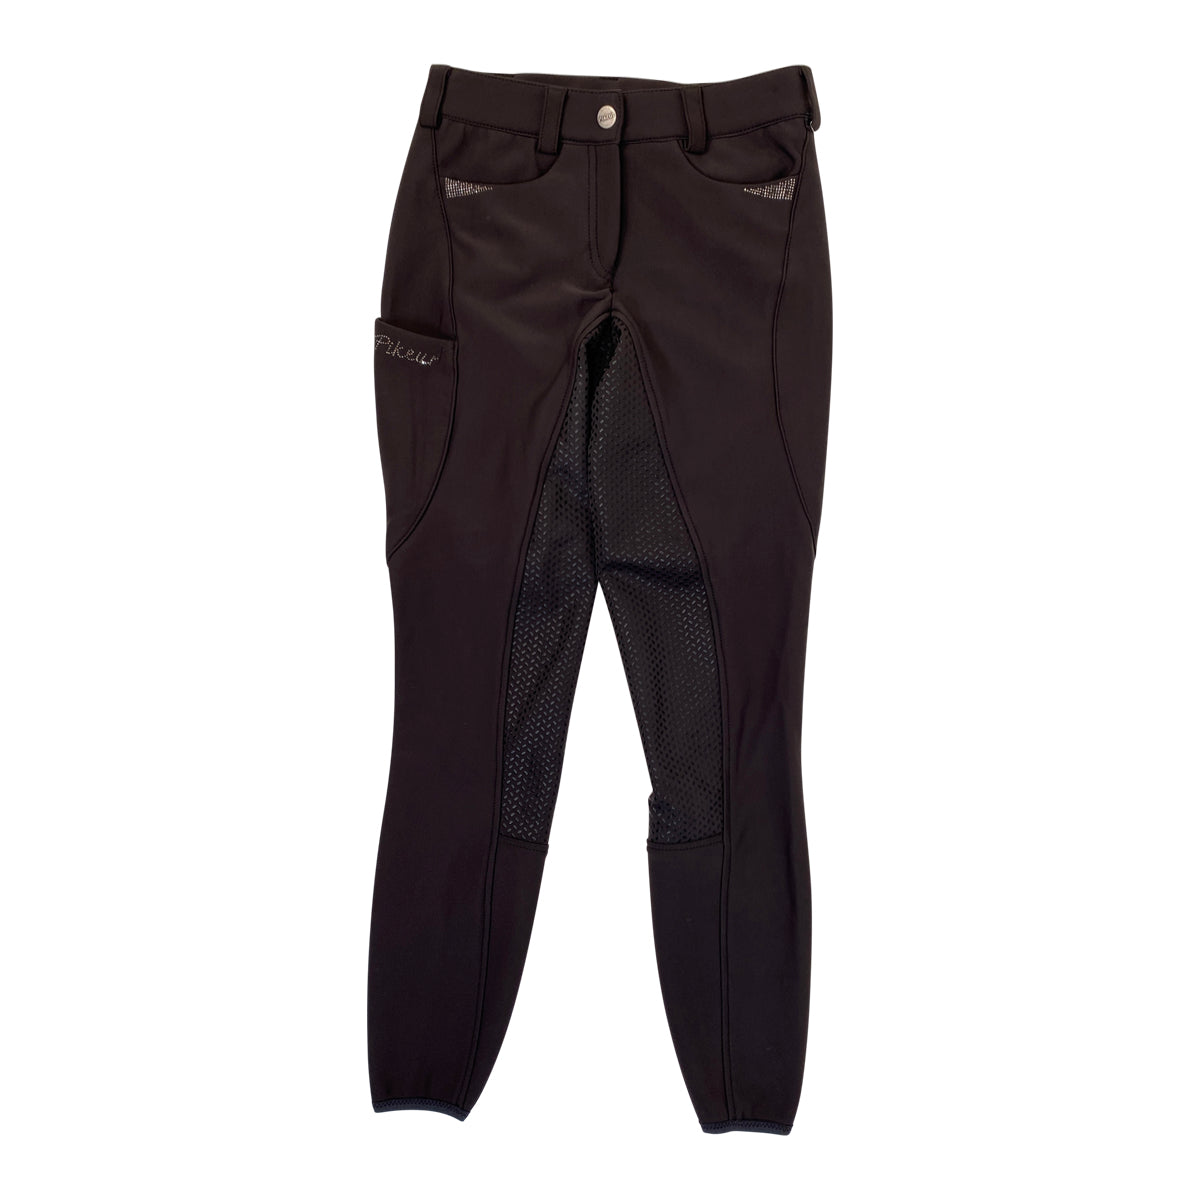 Pikeur 'Laure' Full Grip Breeches in Cocoa/Gems